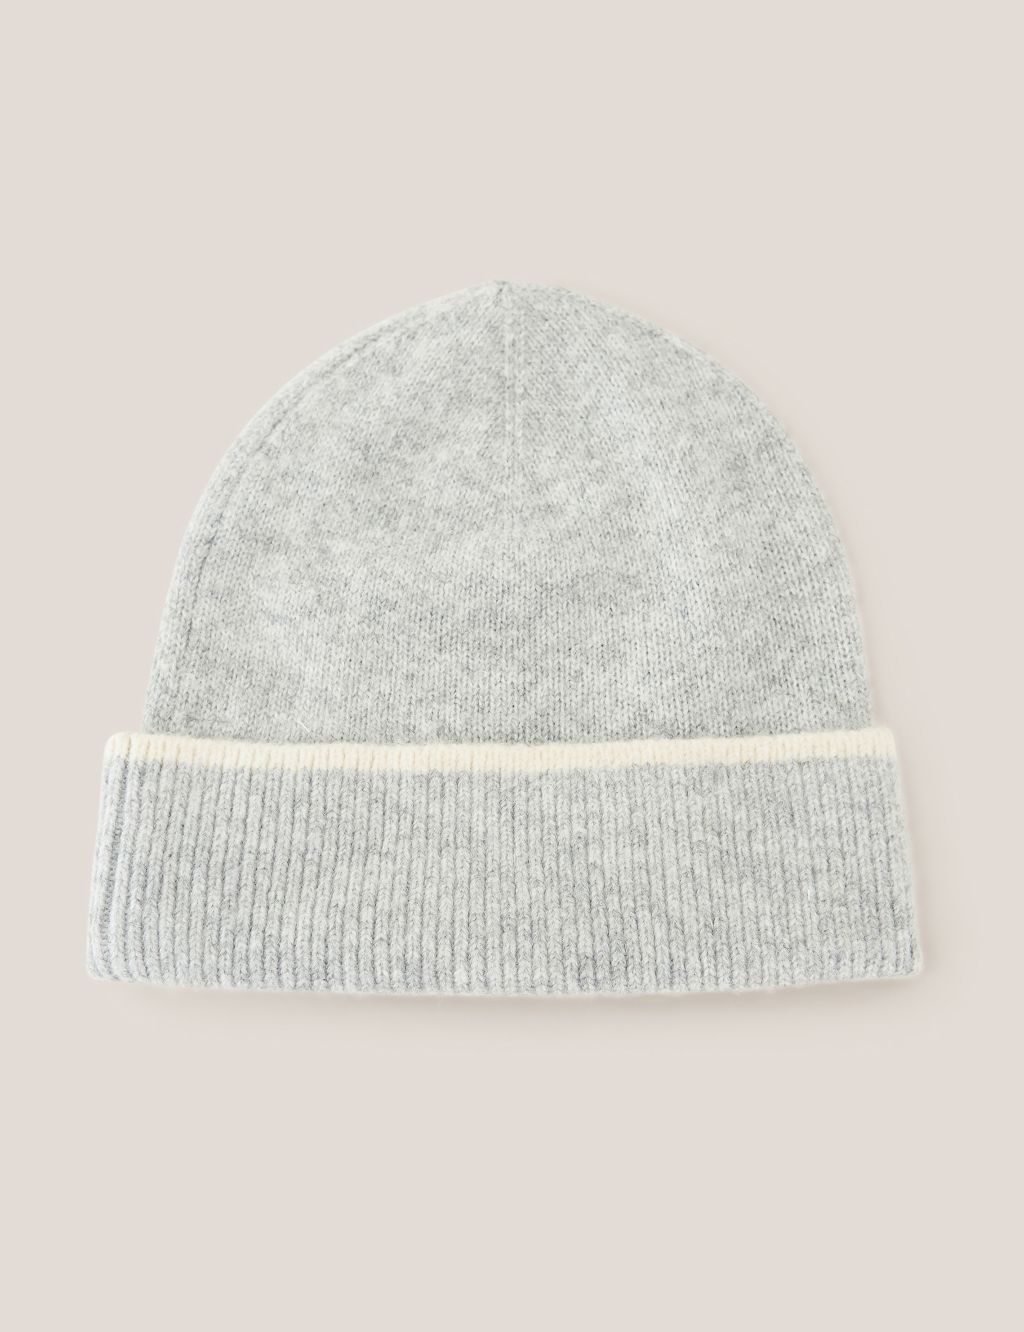 M&S Womens Knitted Faux Fur Pom Hat - Grey